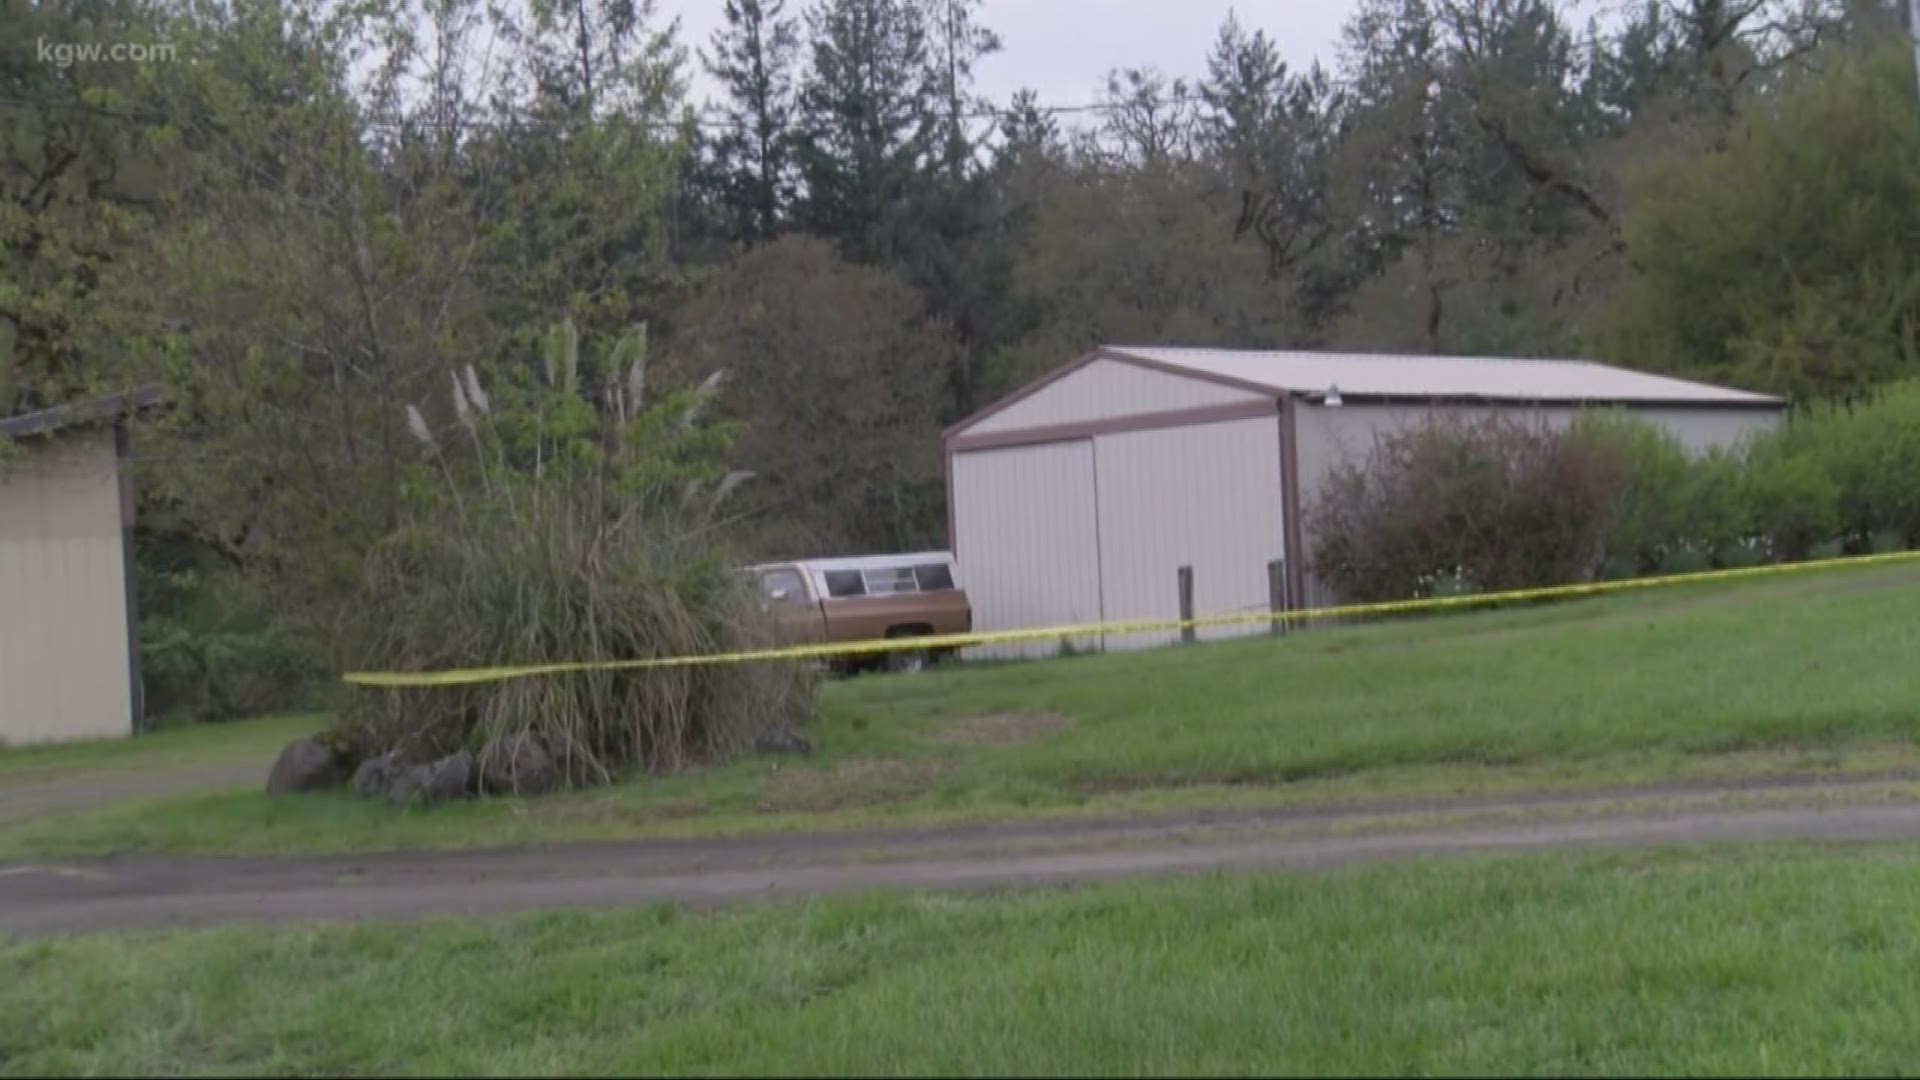 Deputies are investigating what they’re calling a suspicious death of a 55-year-old woman in rural